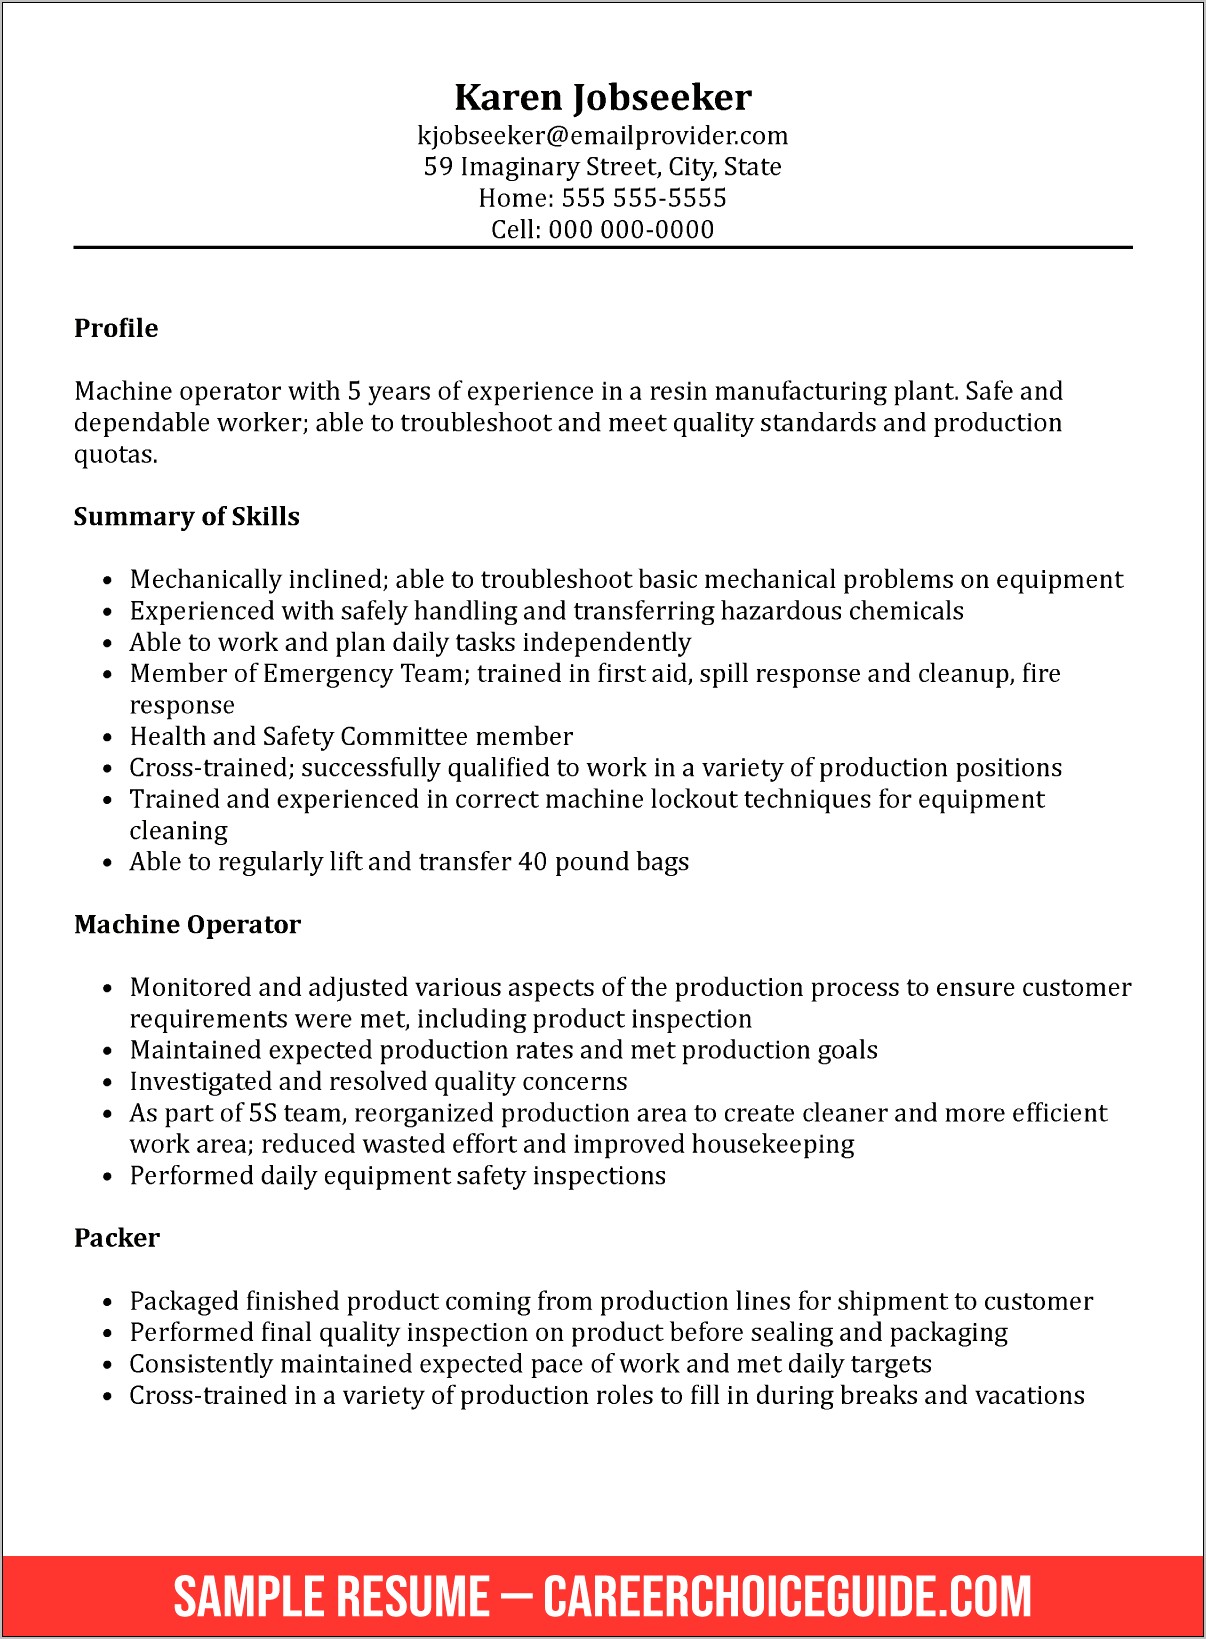 Resume Samples Example Of Resume To Apply Job